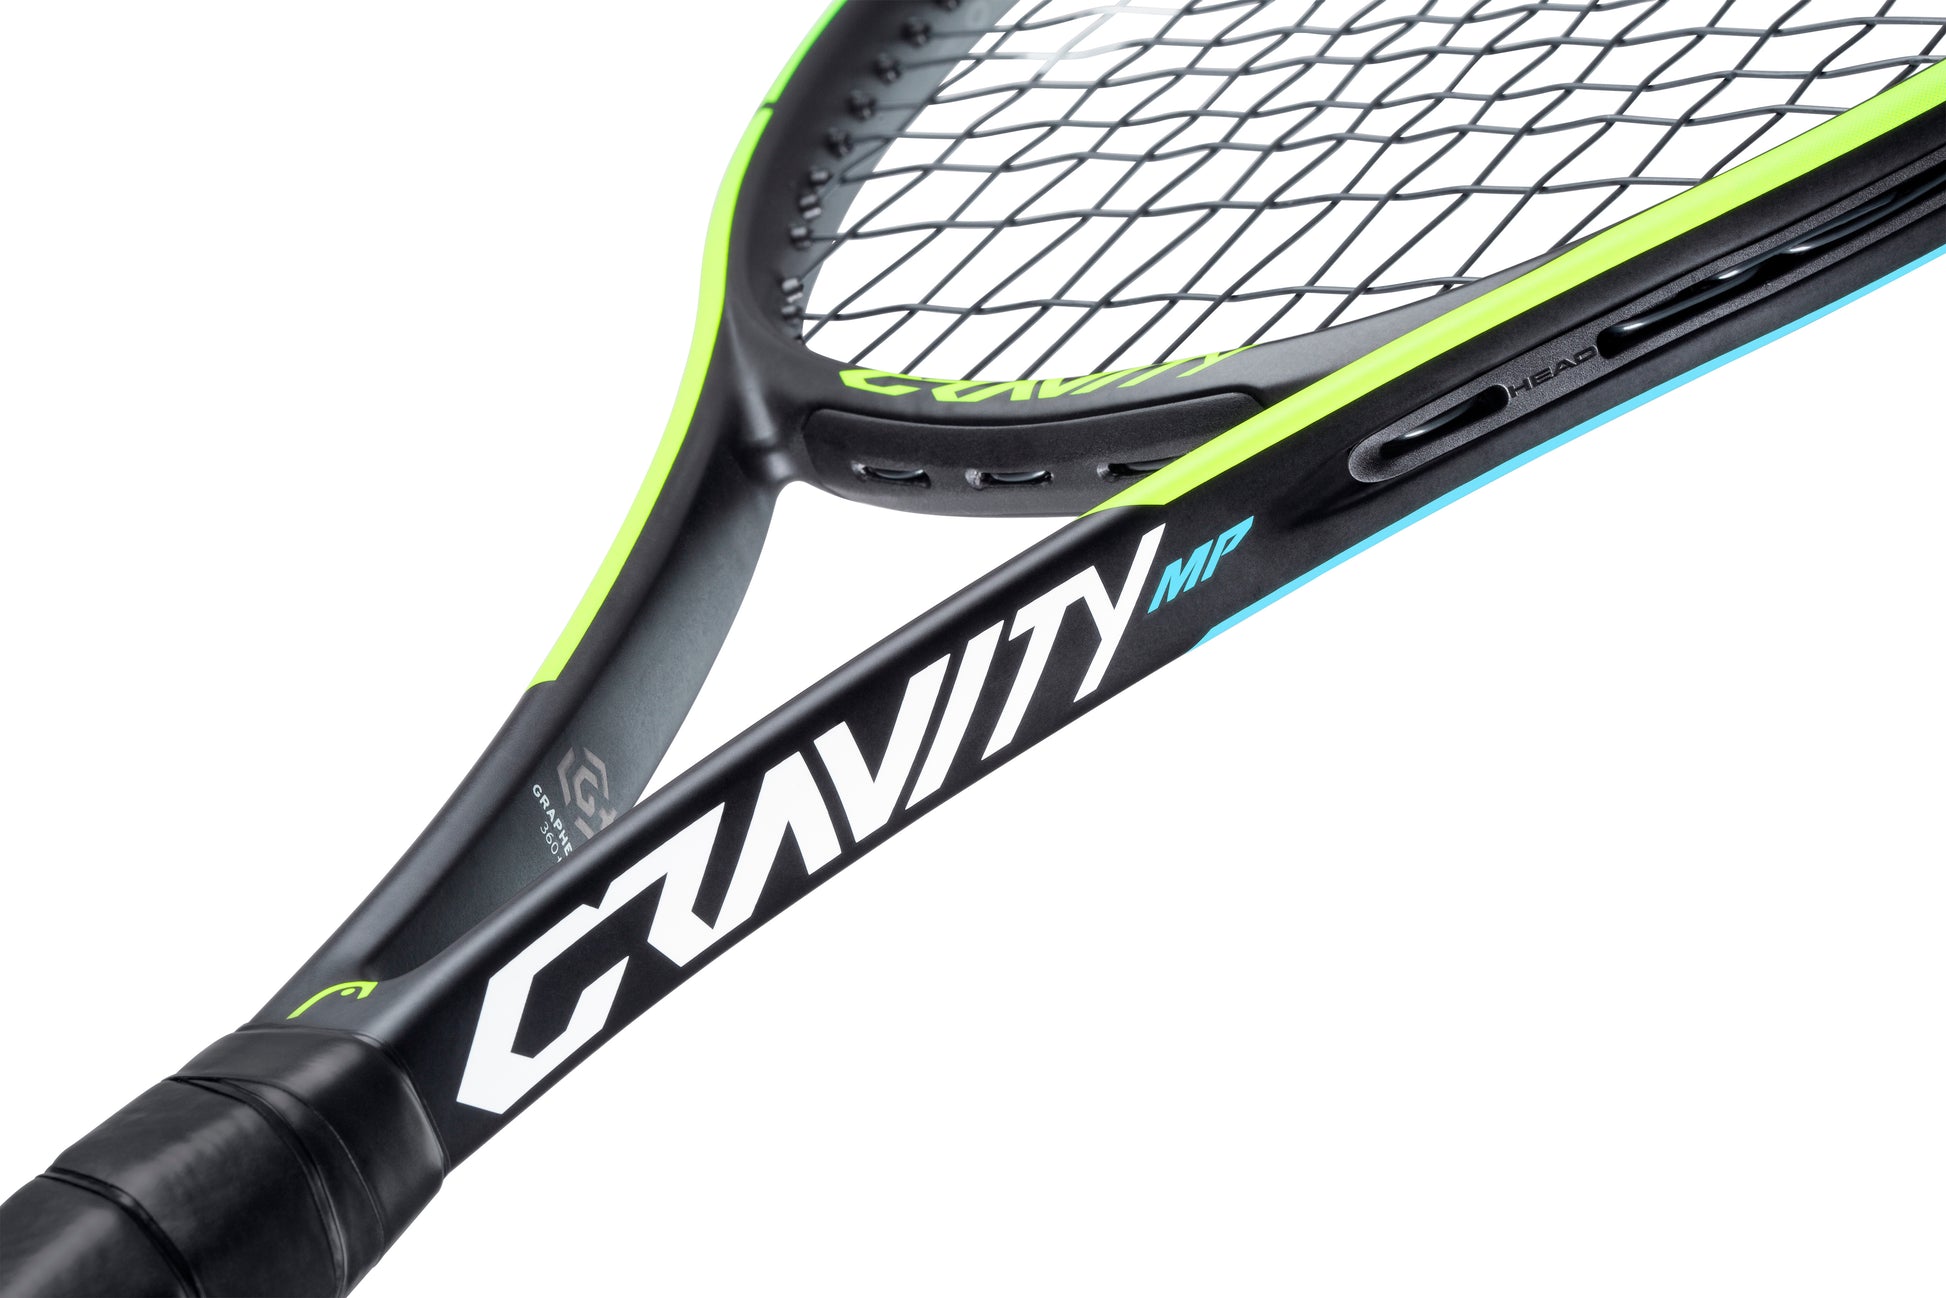 Head Gravity MP Tennis Racket for sale at GSM Sports